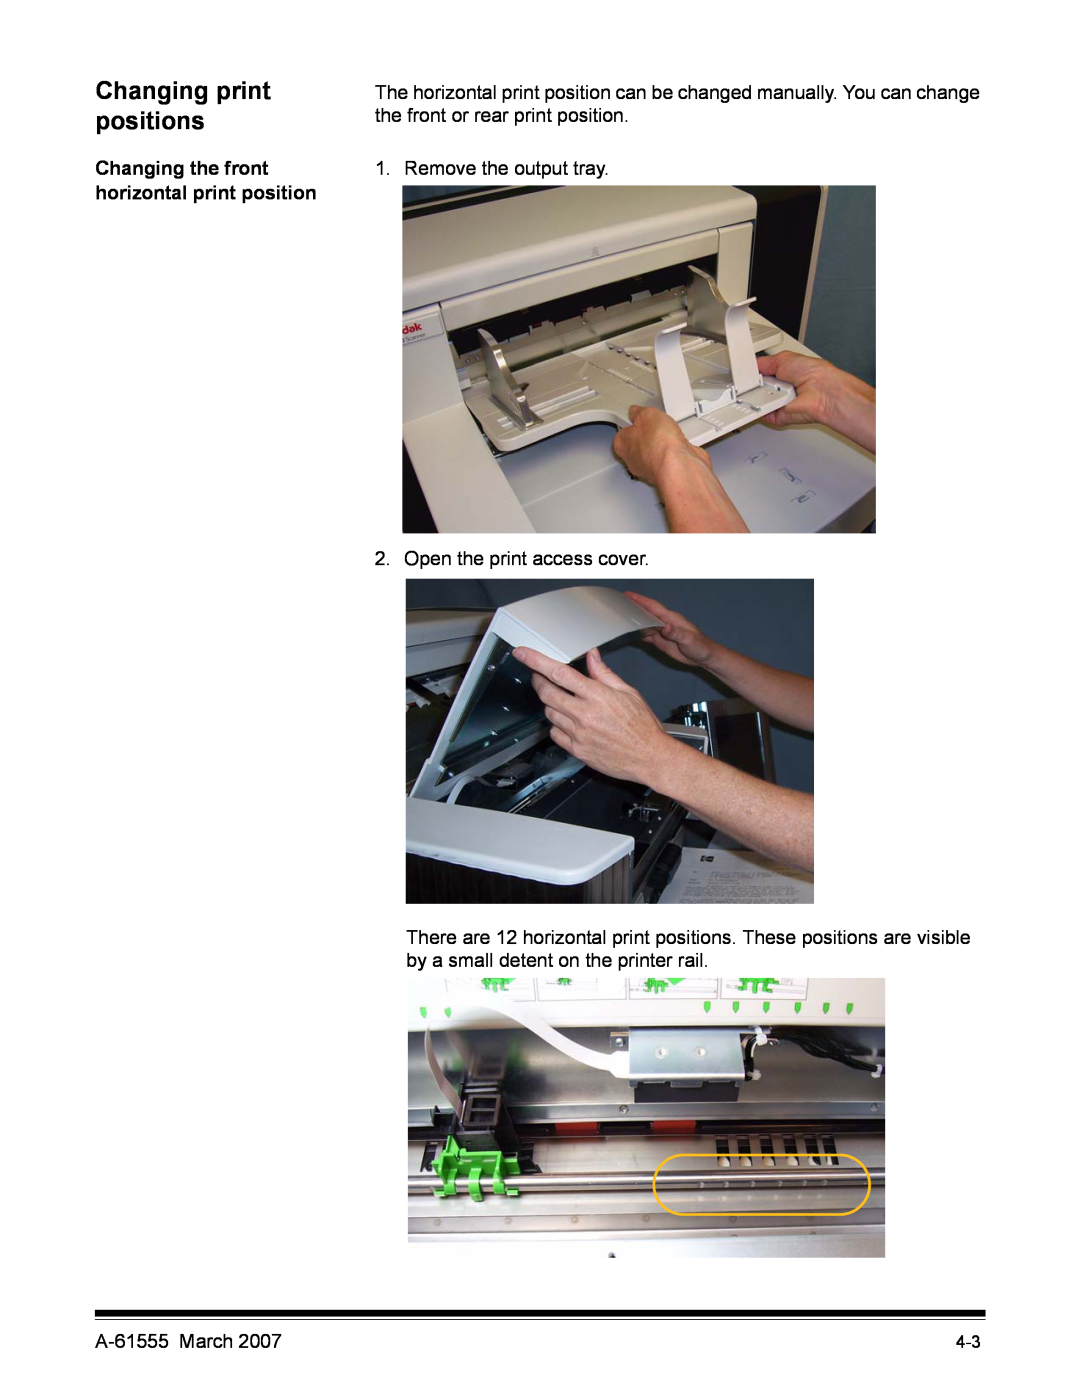 Kodak i1800 Series manual Changing print positions, Changing the front horizontal print position 